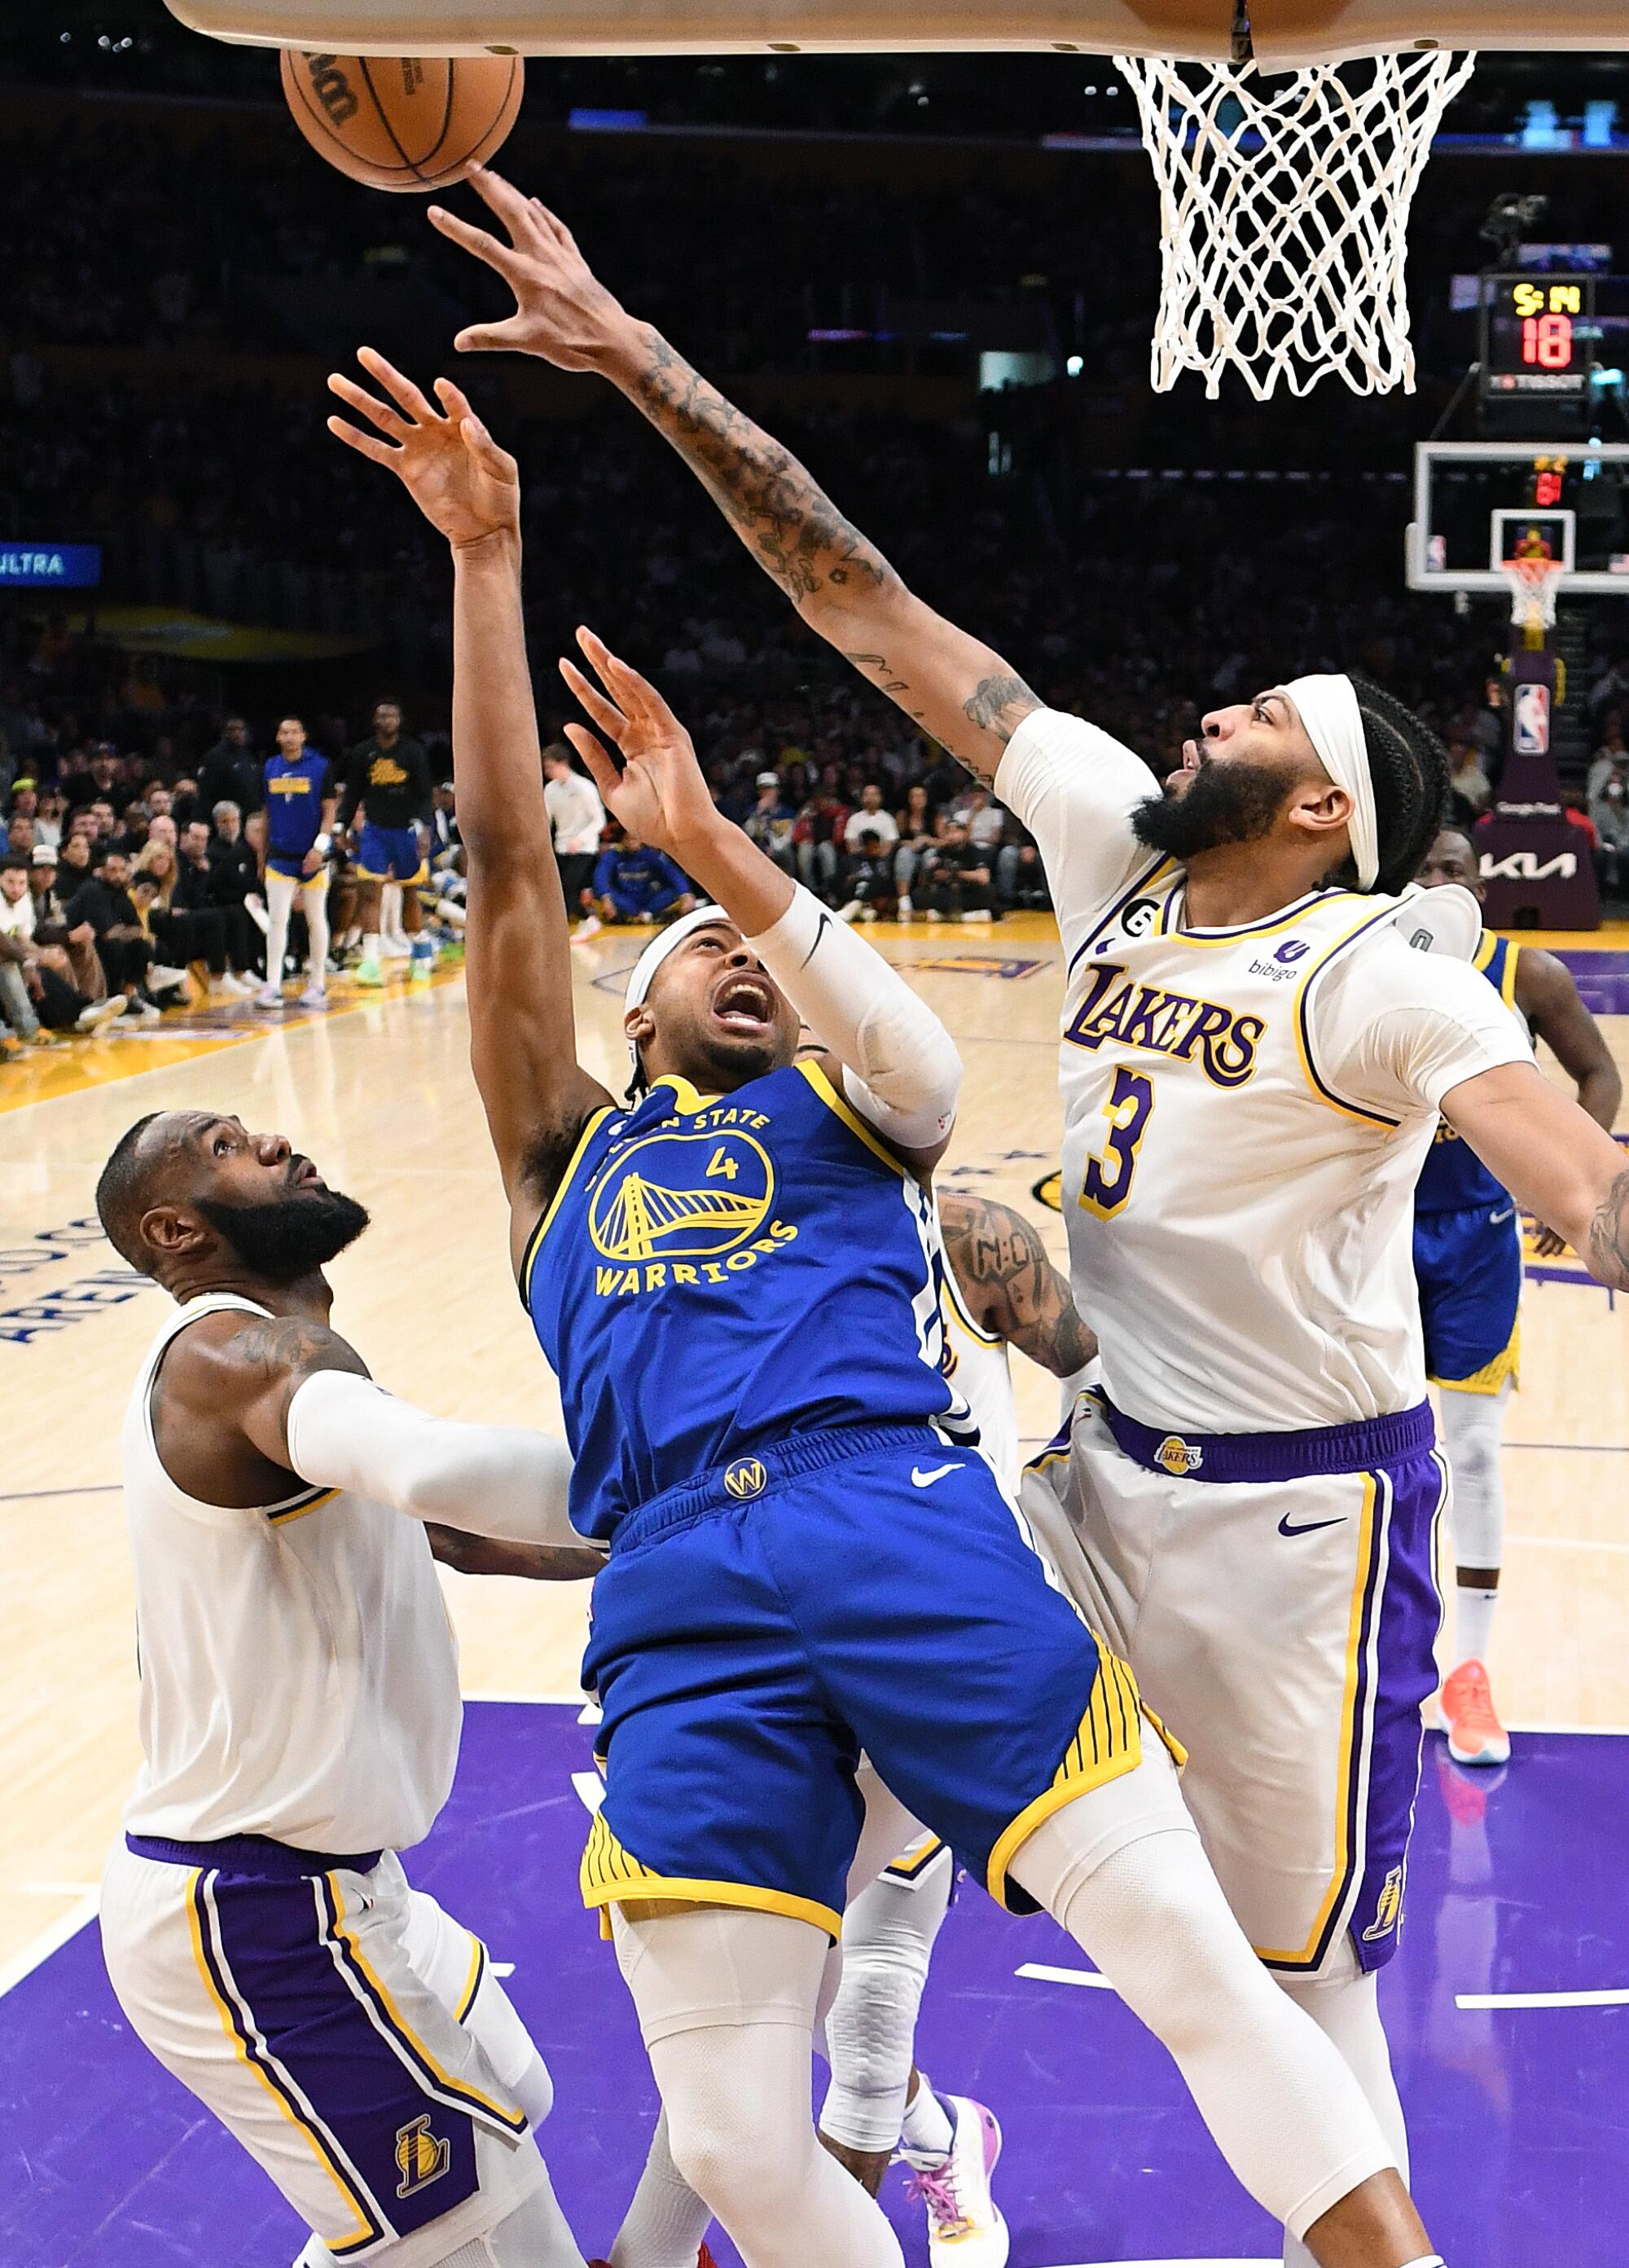 Lakers Anthony Davis blocks the shot of Warriors Moses Moody as LeBron James helps on defense in the first quarter.